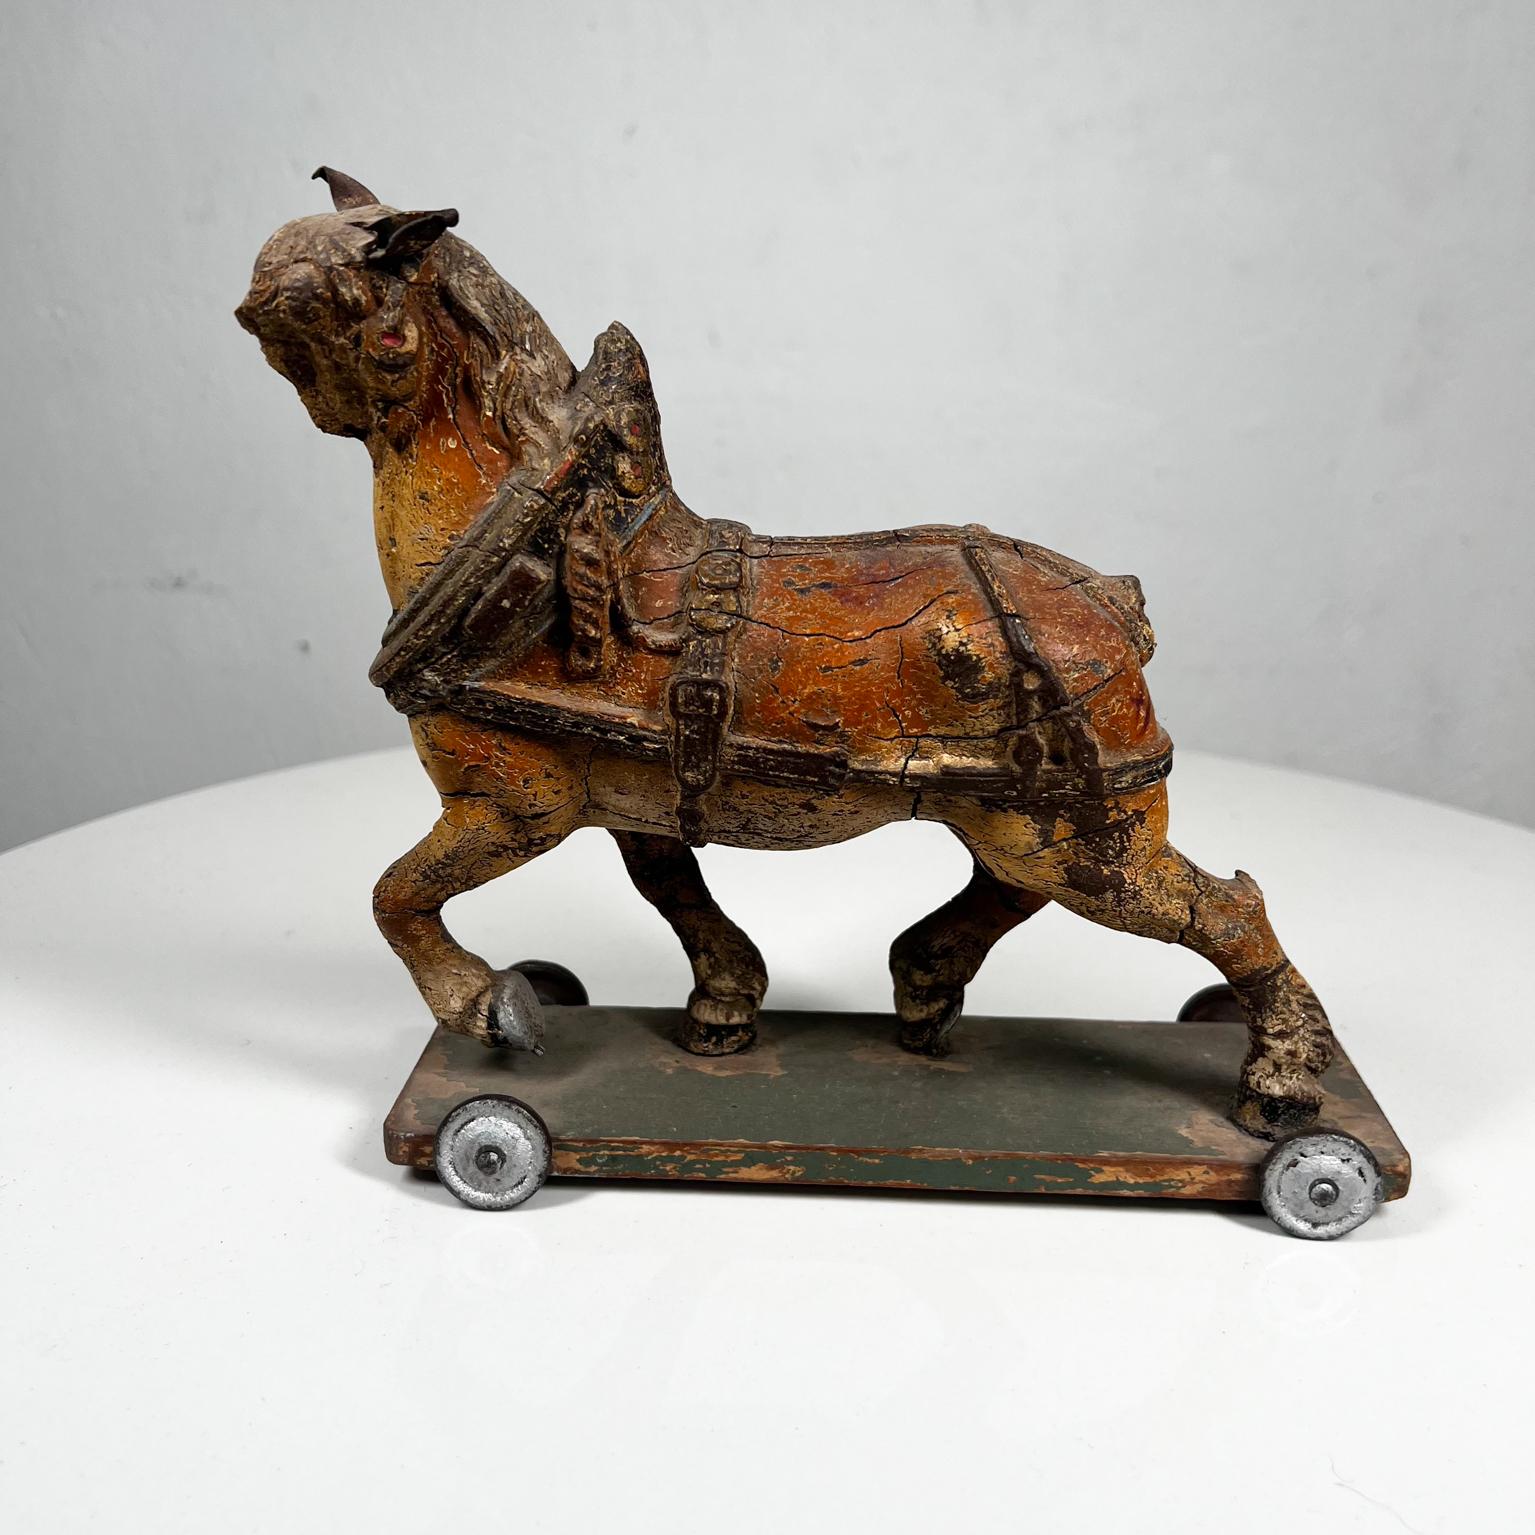 1900s Antique Terracotta Majestic Horse on Wheeled Platform San Luis Potosí Mexico
Collectible Toy Sculpture
9 long x 8 h x 3 w
Terracotta horse. Mounted on a wood base with wheels.
Wonderful old toy, original patina. Missing some pieces,